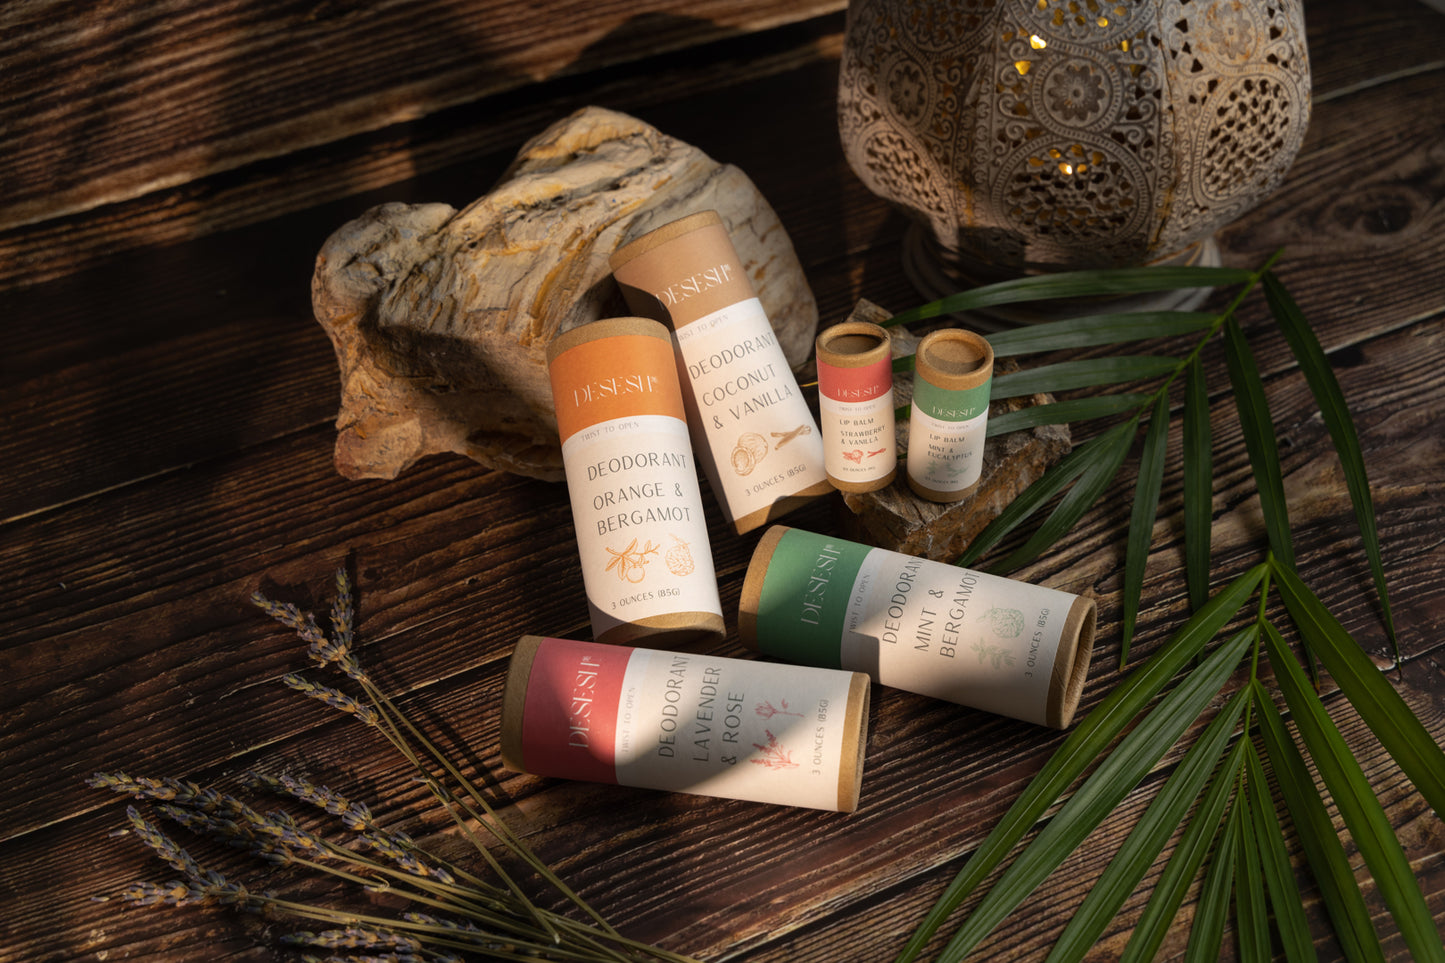 This image shows the Desesh natural plastic free lip balm in a paper based cardboard push up tube for a more eco friendly sustainable zero waste lip balm. Shown here are the natural lip balm and deodorant products that Desesh offers